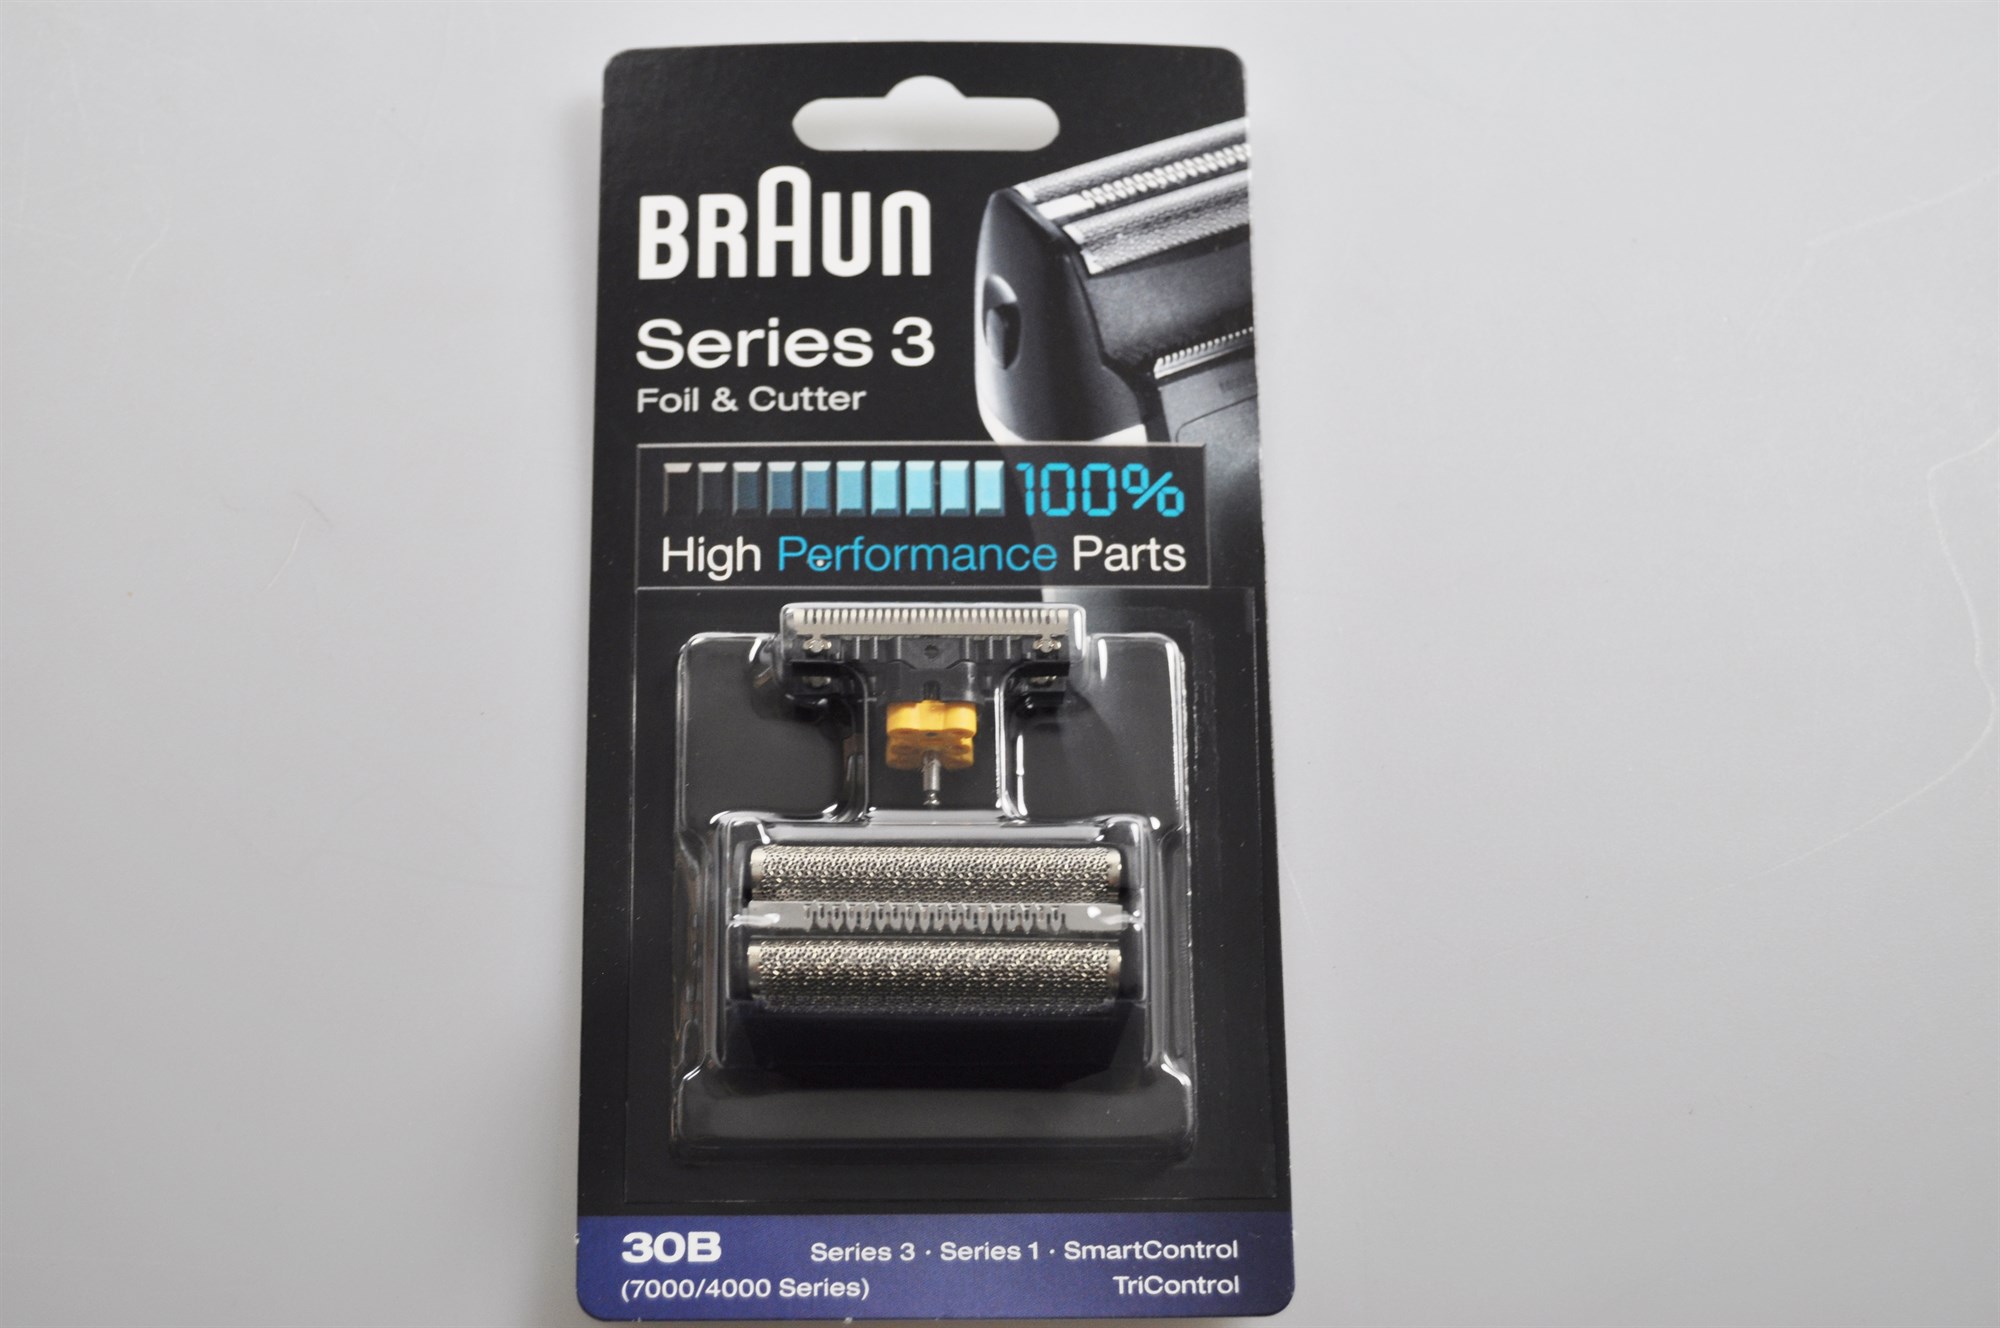   - Braun 7000 series Syncro foil and  cutter